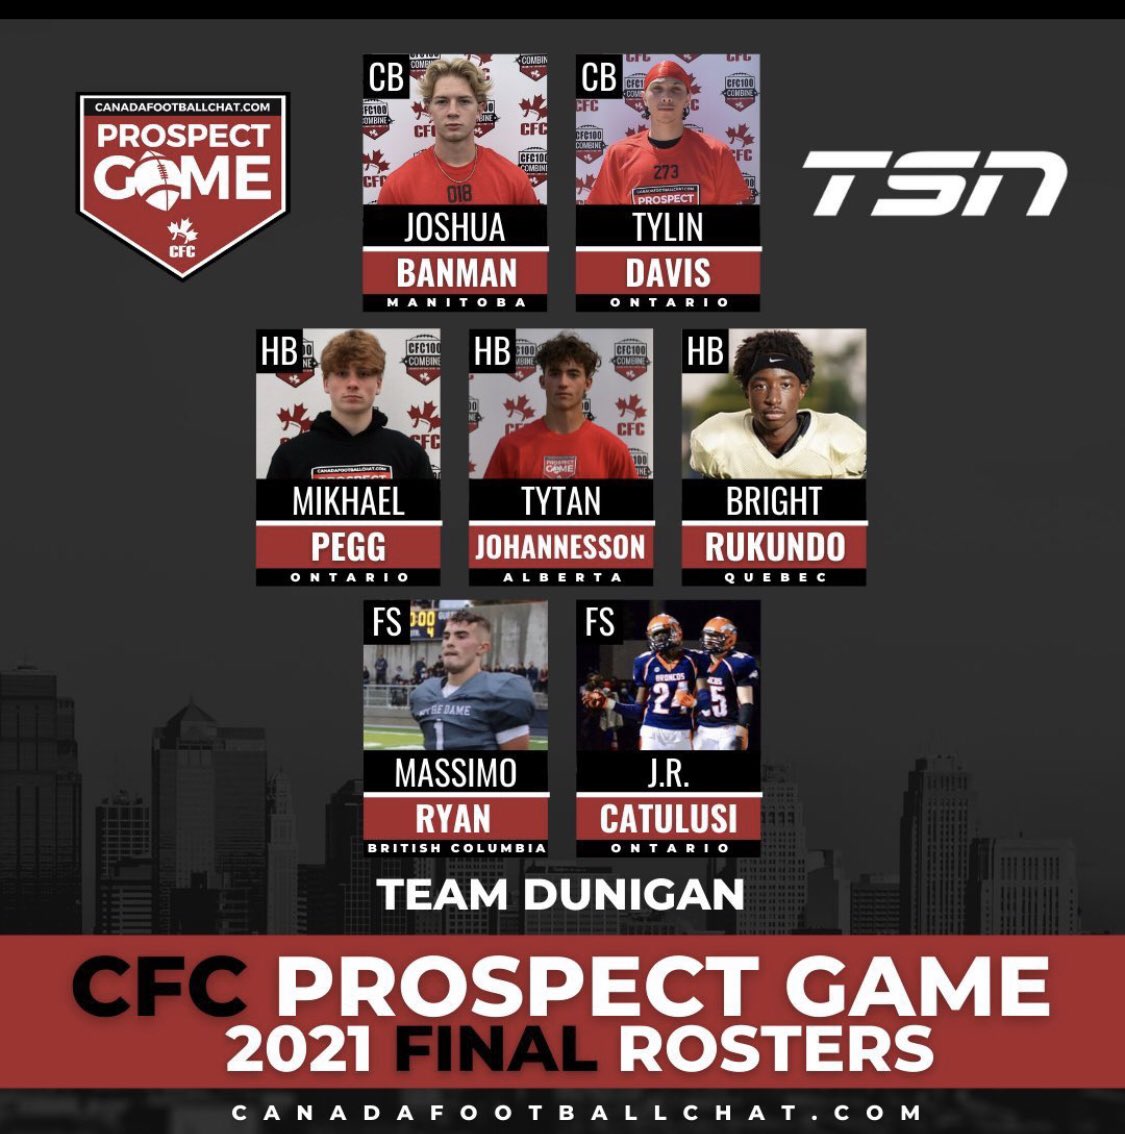 Very thankful to be selected as an All-Canadian, and be given the opportunity to play in the TSN Prospect Game🙏🏾🇨🇦🦾 @GlenAMills @CFCProspectGame @chatfootball @SXRavens